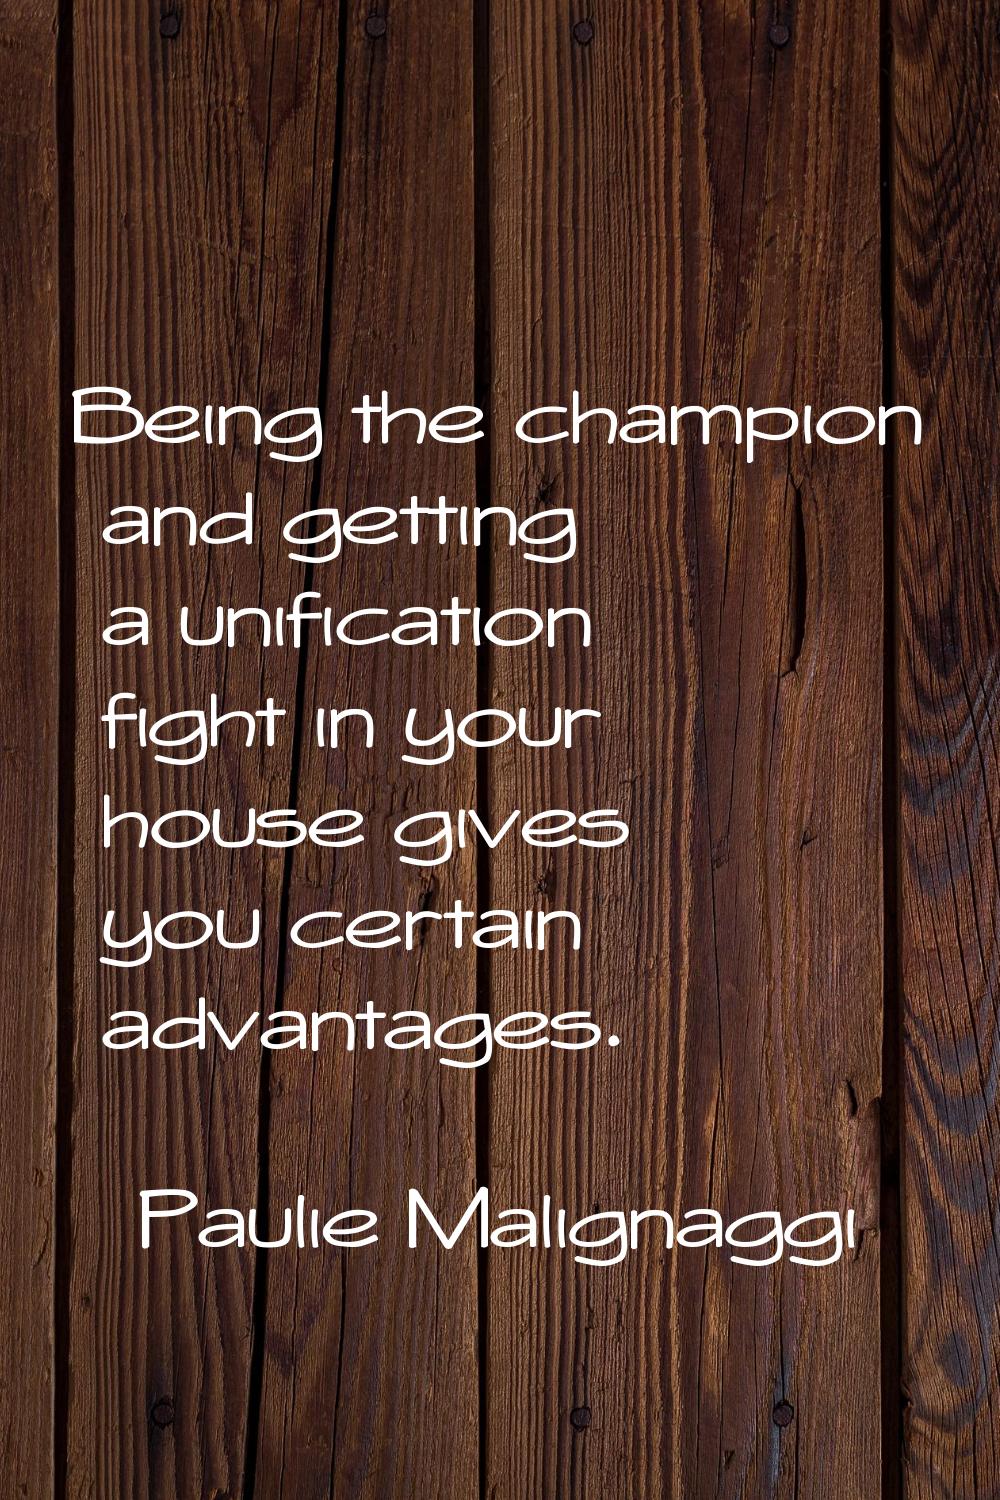 Being the champion and getting a unification fight in your house gives you certain advantages.